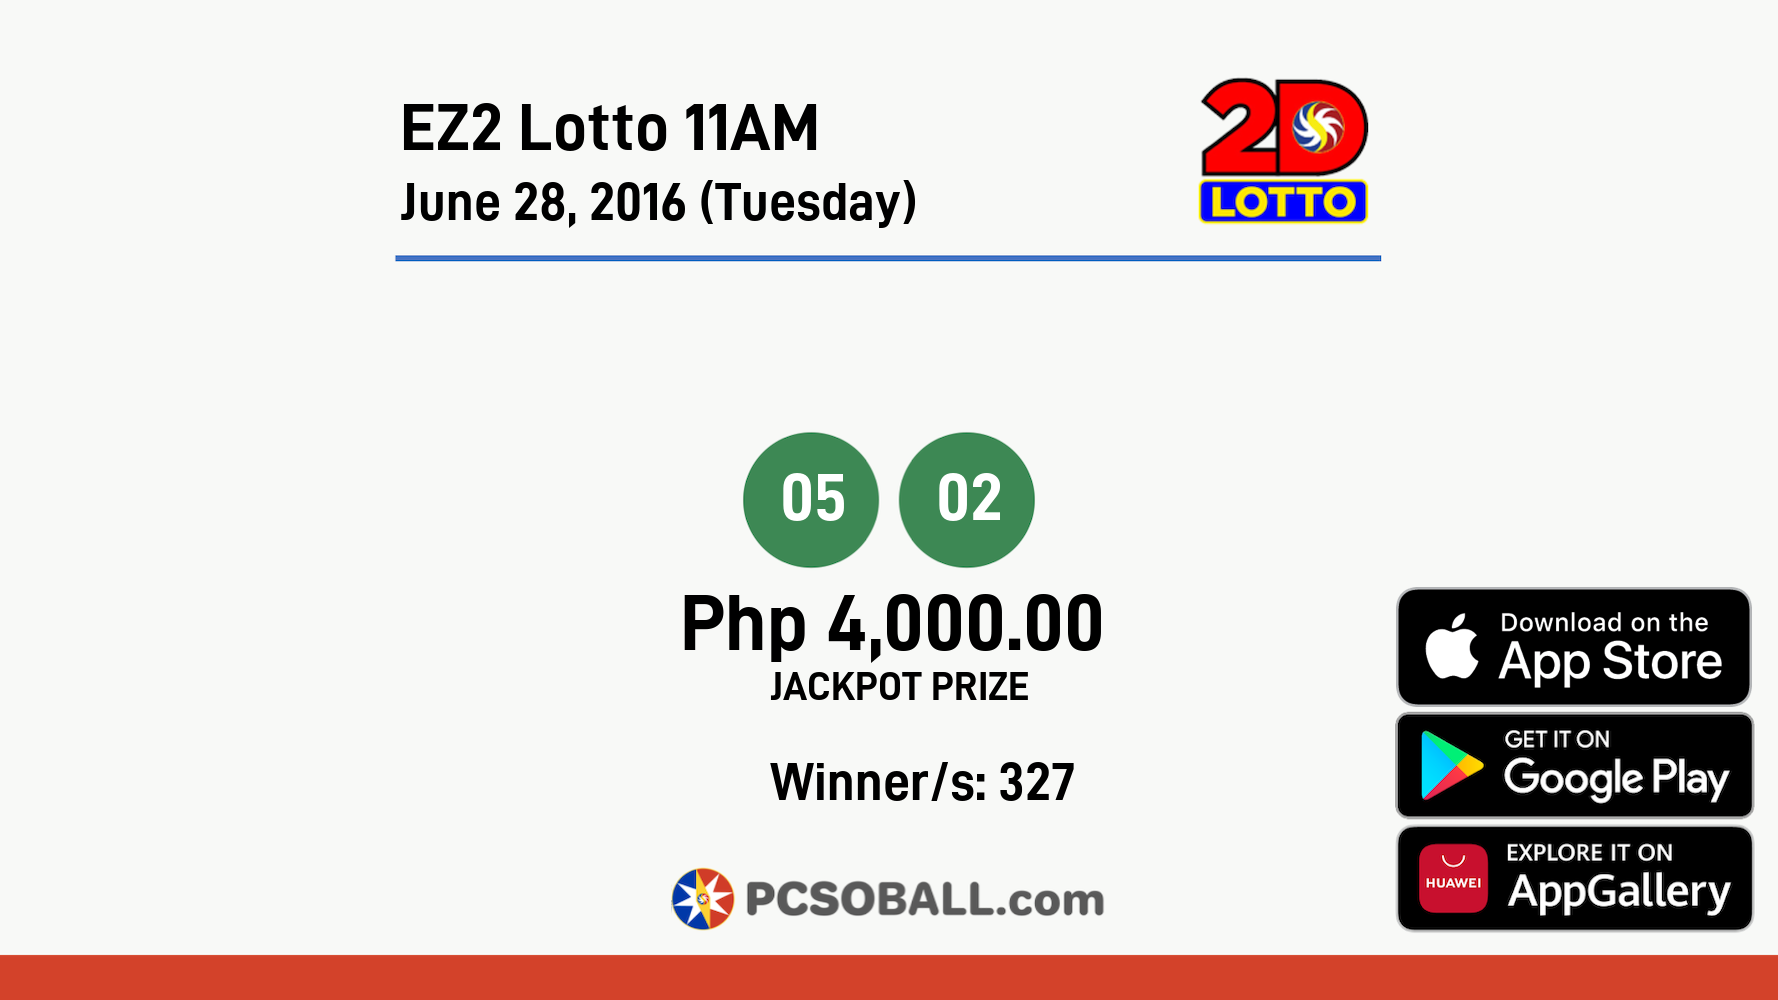 EZ2 Lotto 11AM June 28, 2016 (Tuesday) Result